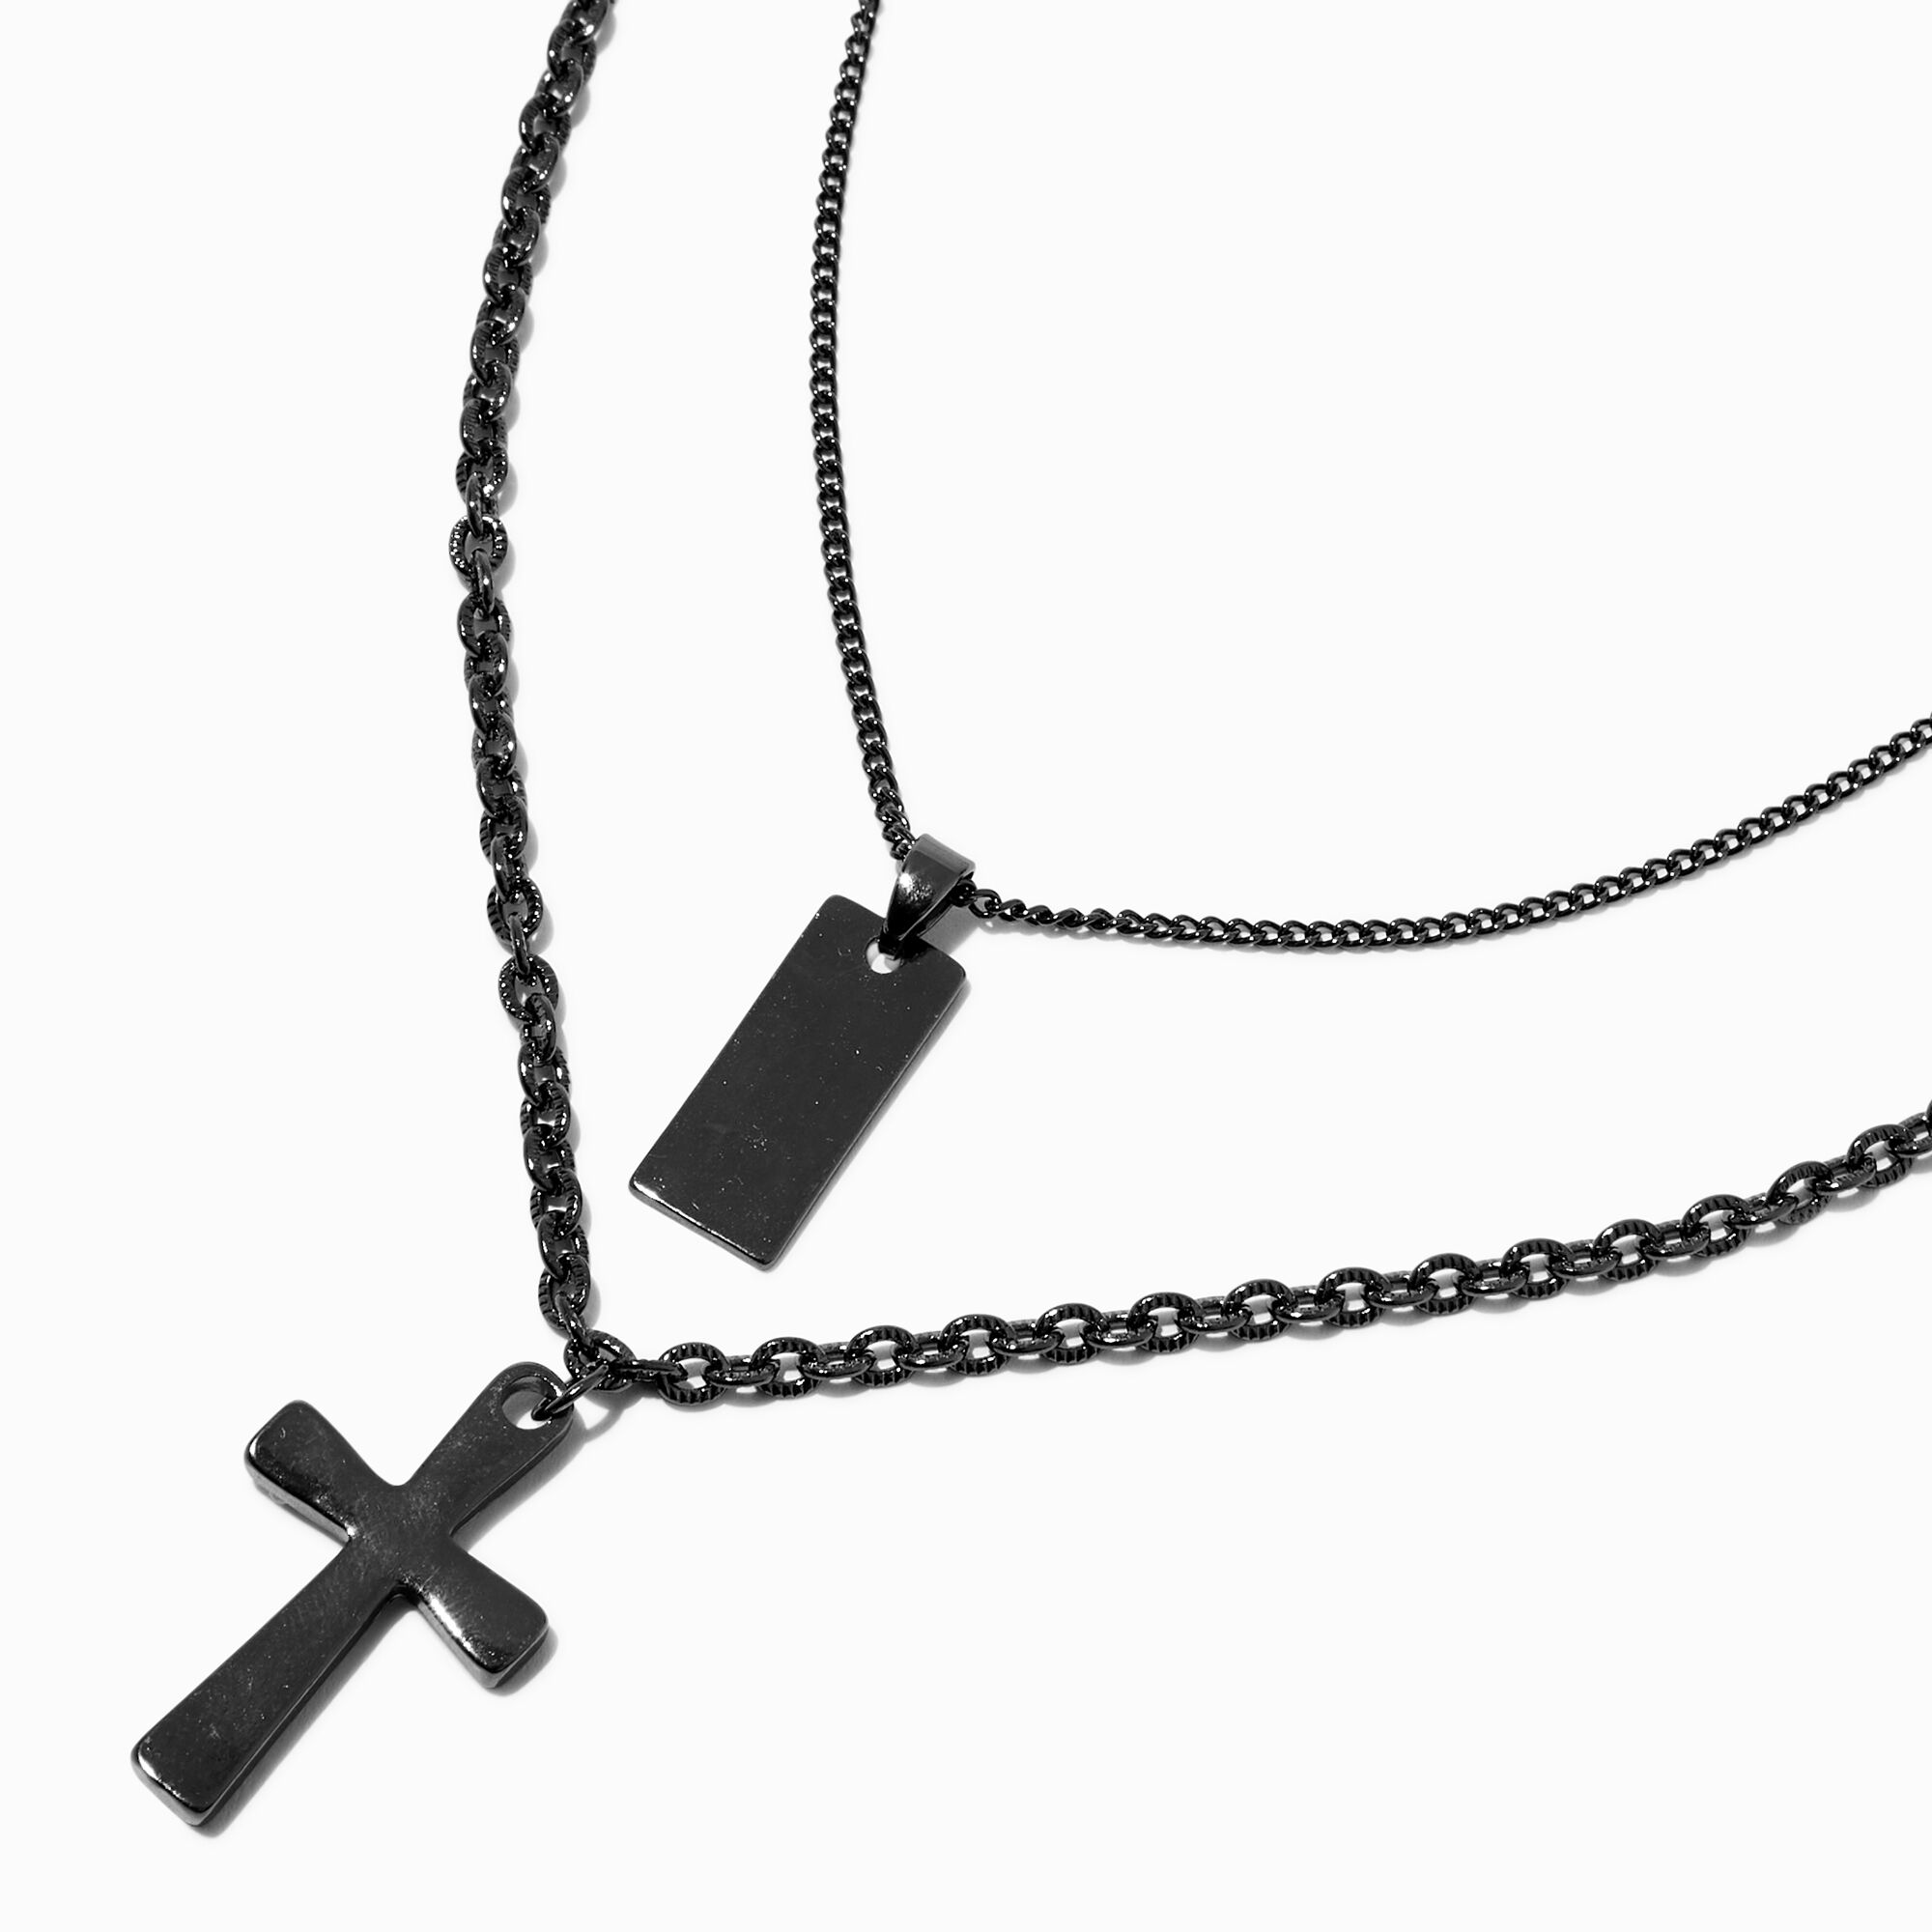 View Claires HematiteTone Cross Tag Necklace Set 2 Pack information